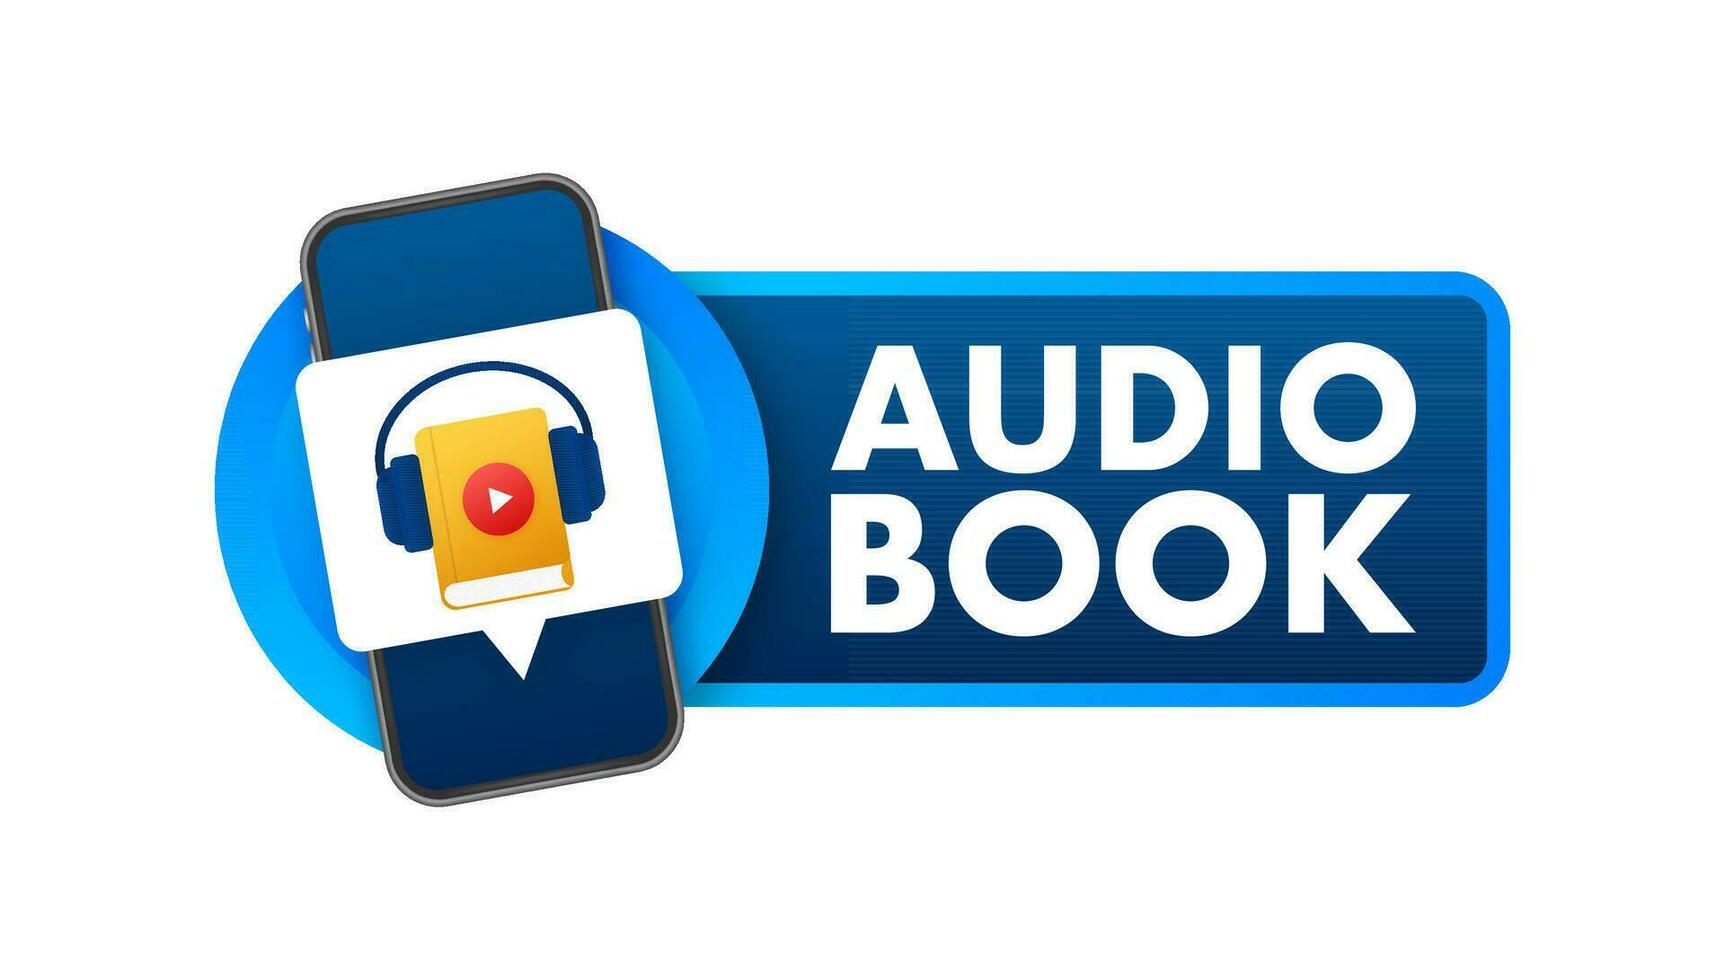 Concept audio book for web page, banner, social media. Vector illustration